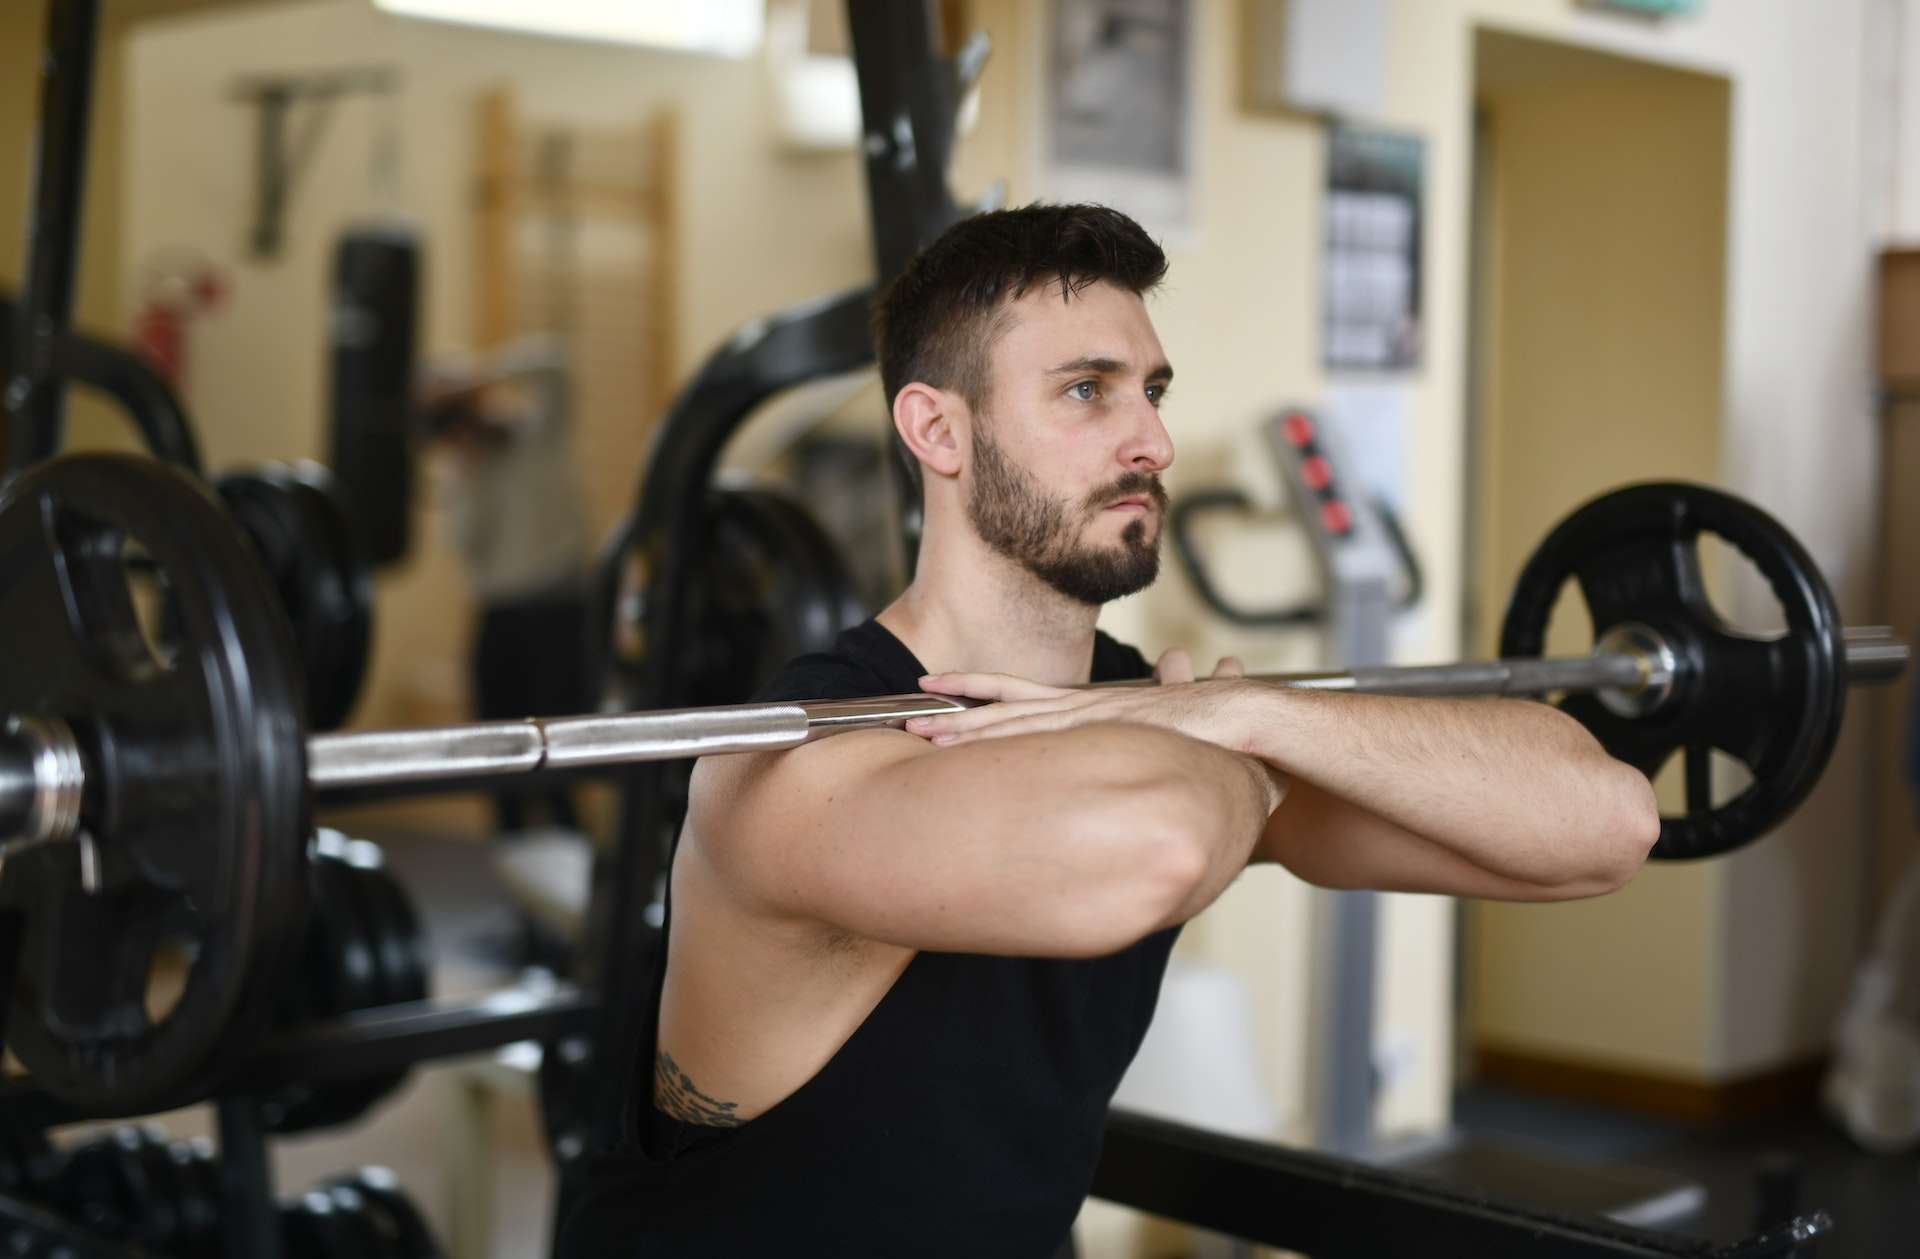 Man In Black Tank Top Working Out 